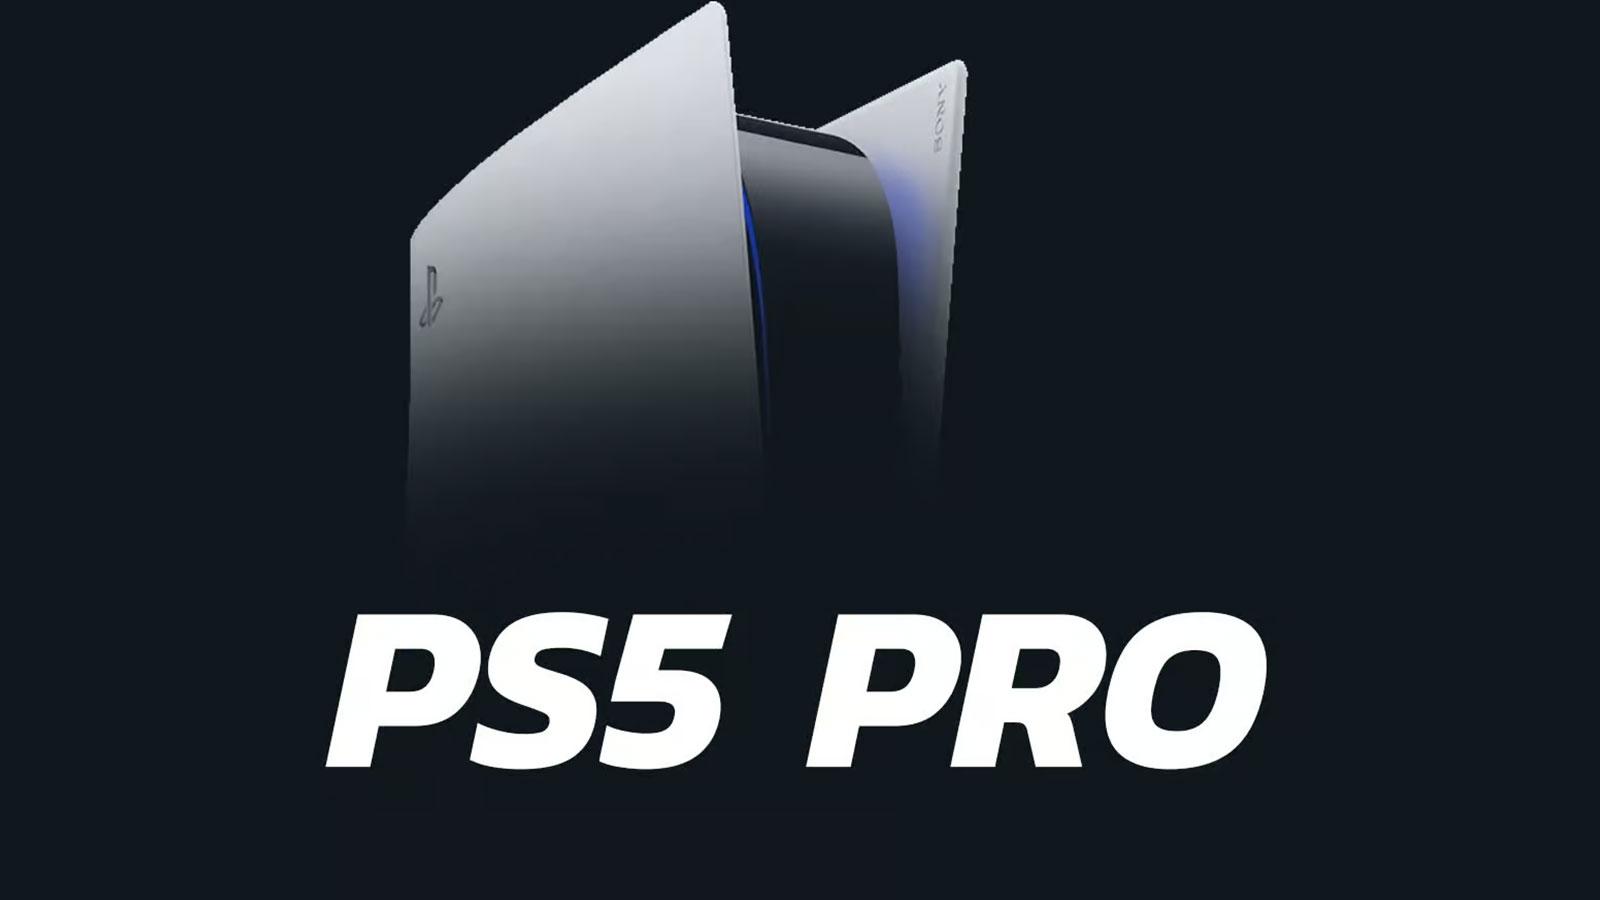 Console PlayStation 5 Pro